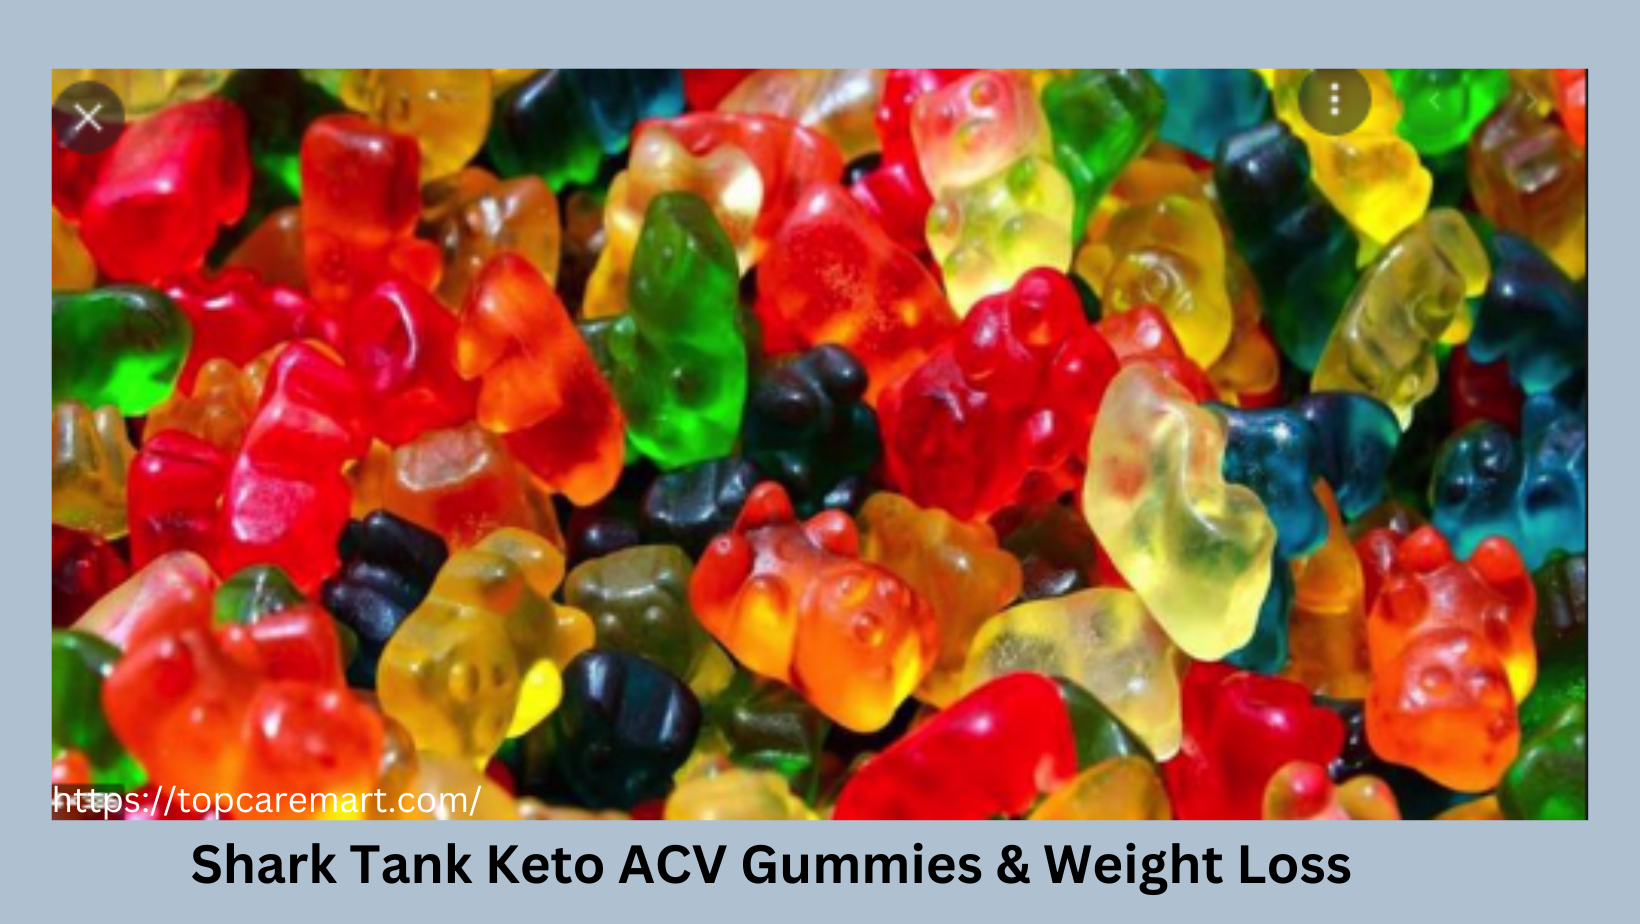 Shark Tank 'Keto ACV Fuel Gummies'{Keto Bites Gummies}  Reviews Purchase Your 1st Choice keto Gummies Bottle 100% Real Keto Supplement, "2023" Special Reviews & Offers, Buy Now!